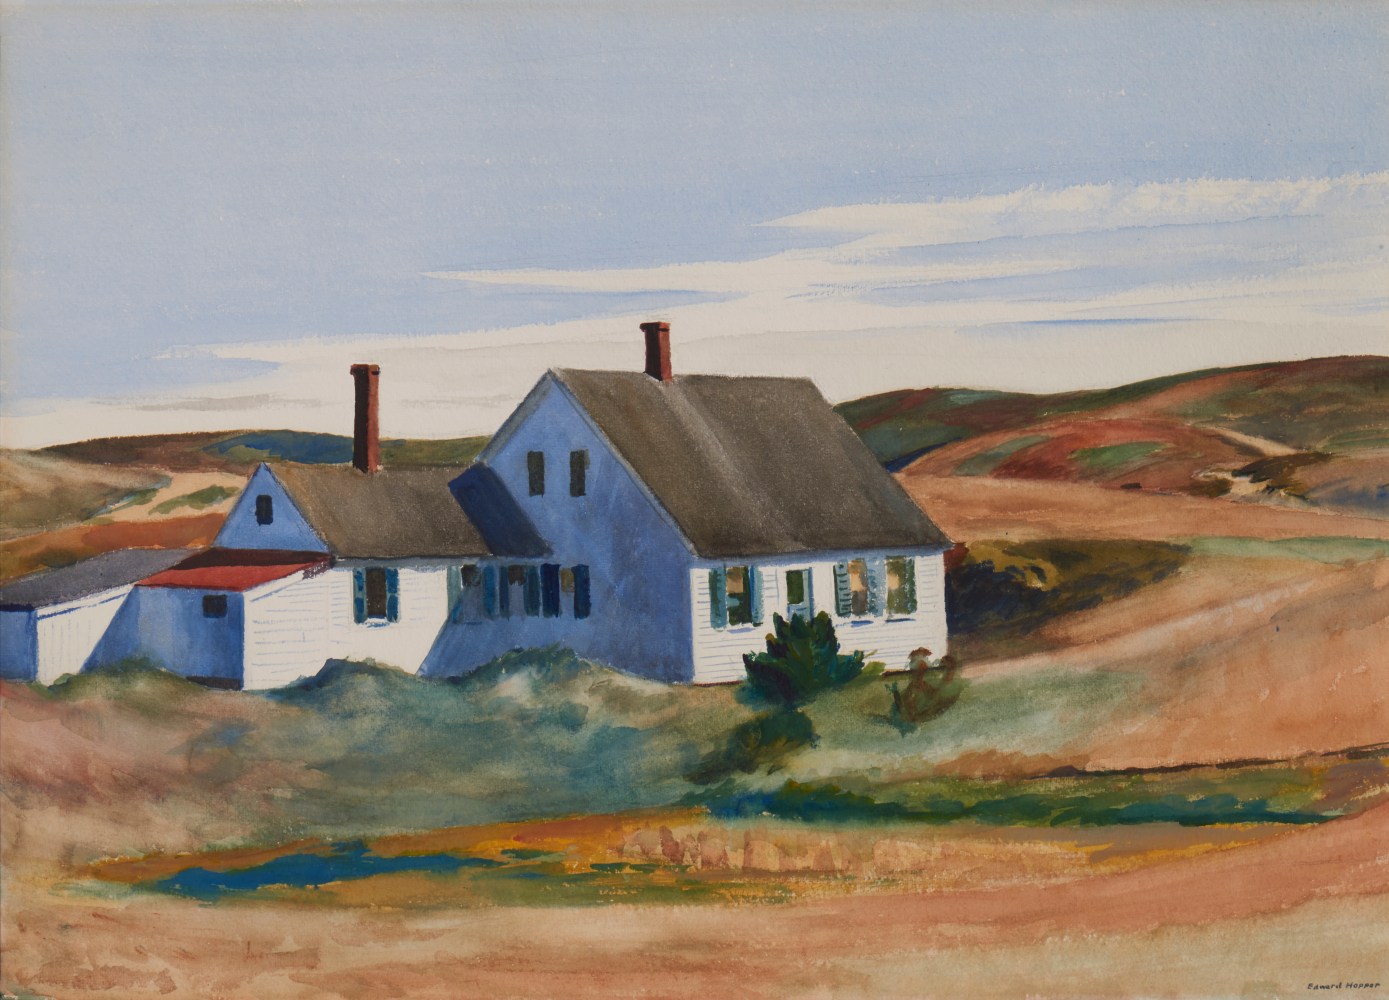 Edward Hopper&amp;nbsp;(1882-1967)&amp;nbsp;

Kelly Jenness House, 1932

Watercolor

20 x 28 inches